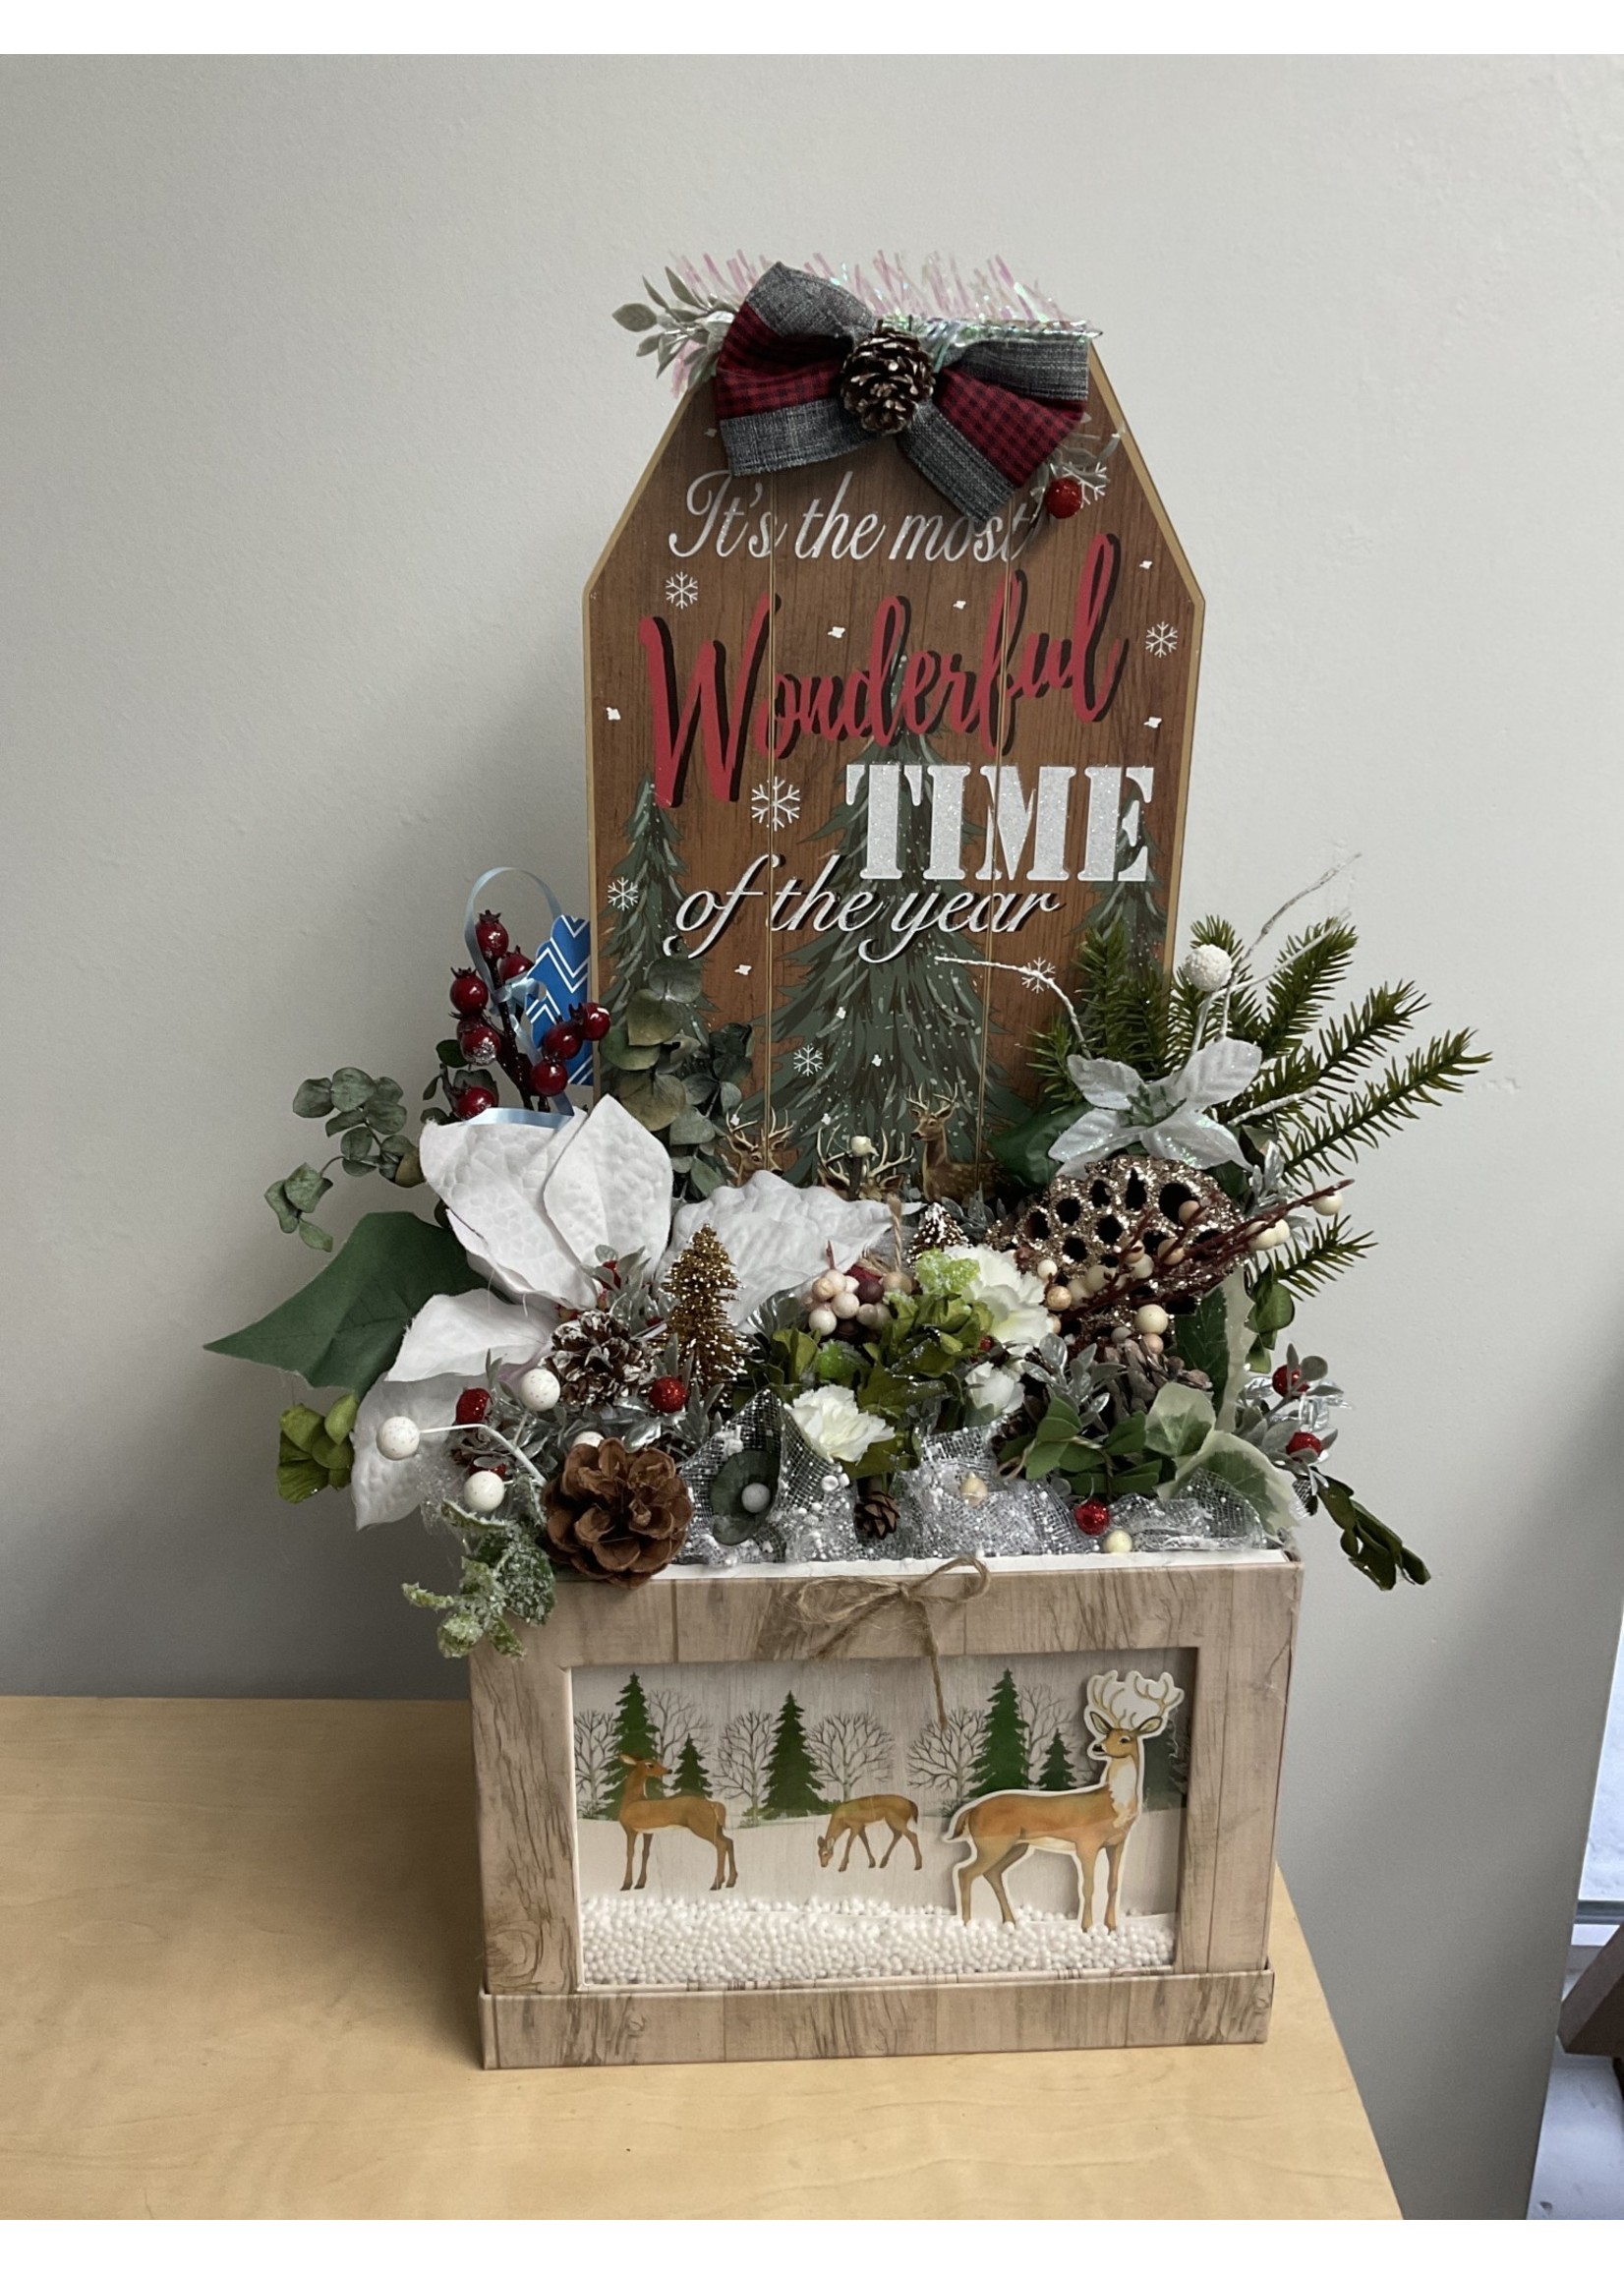 My New Favorite Thing Centerpiece Deer Display "Most Wonderful Time of the Year"